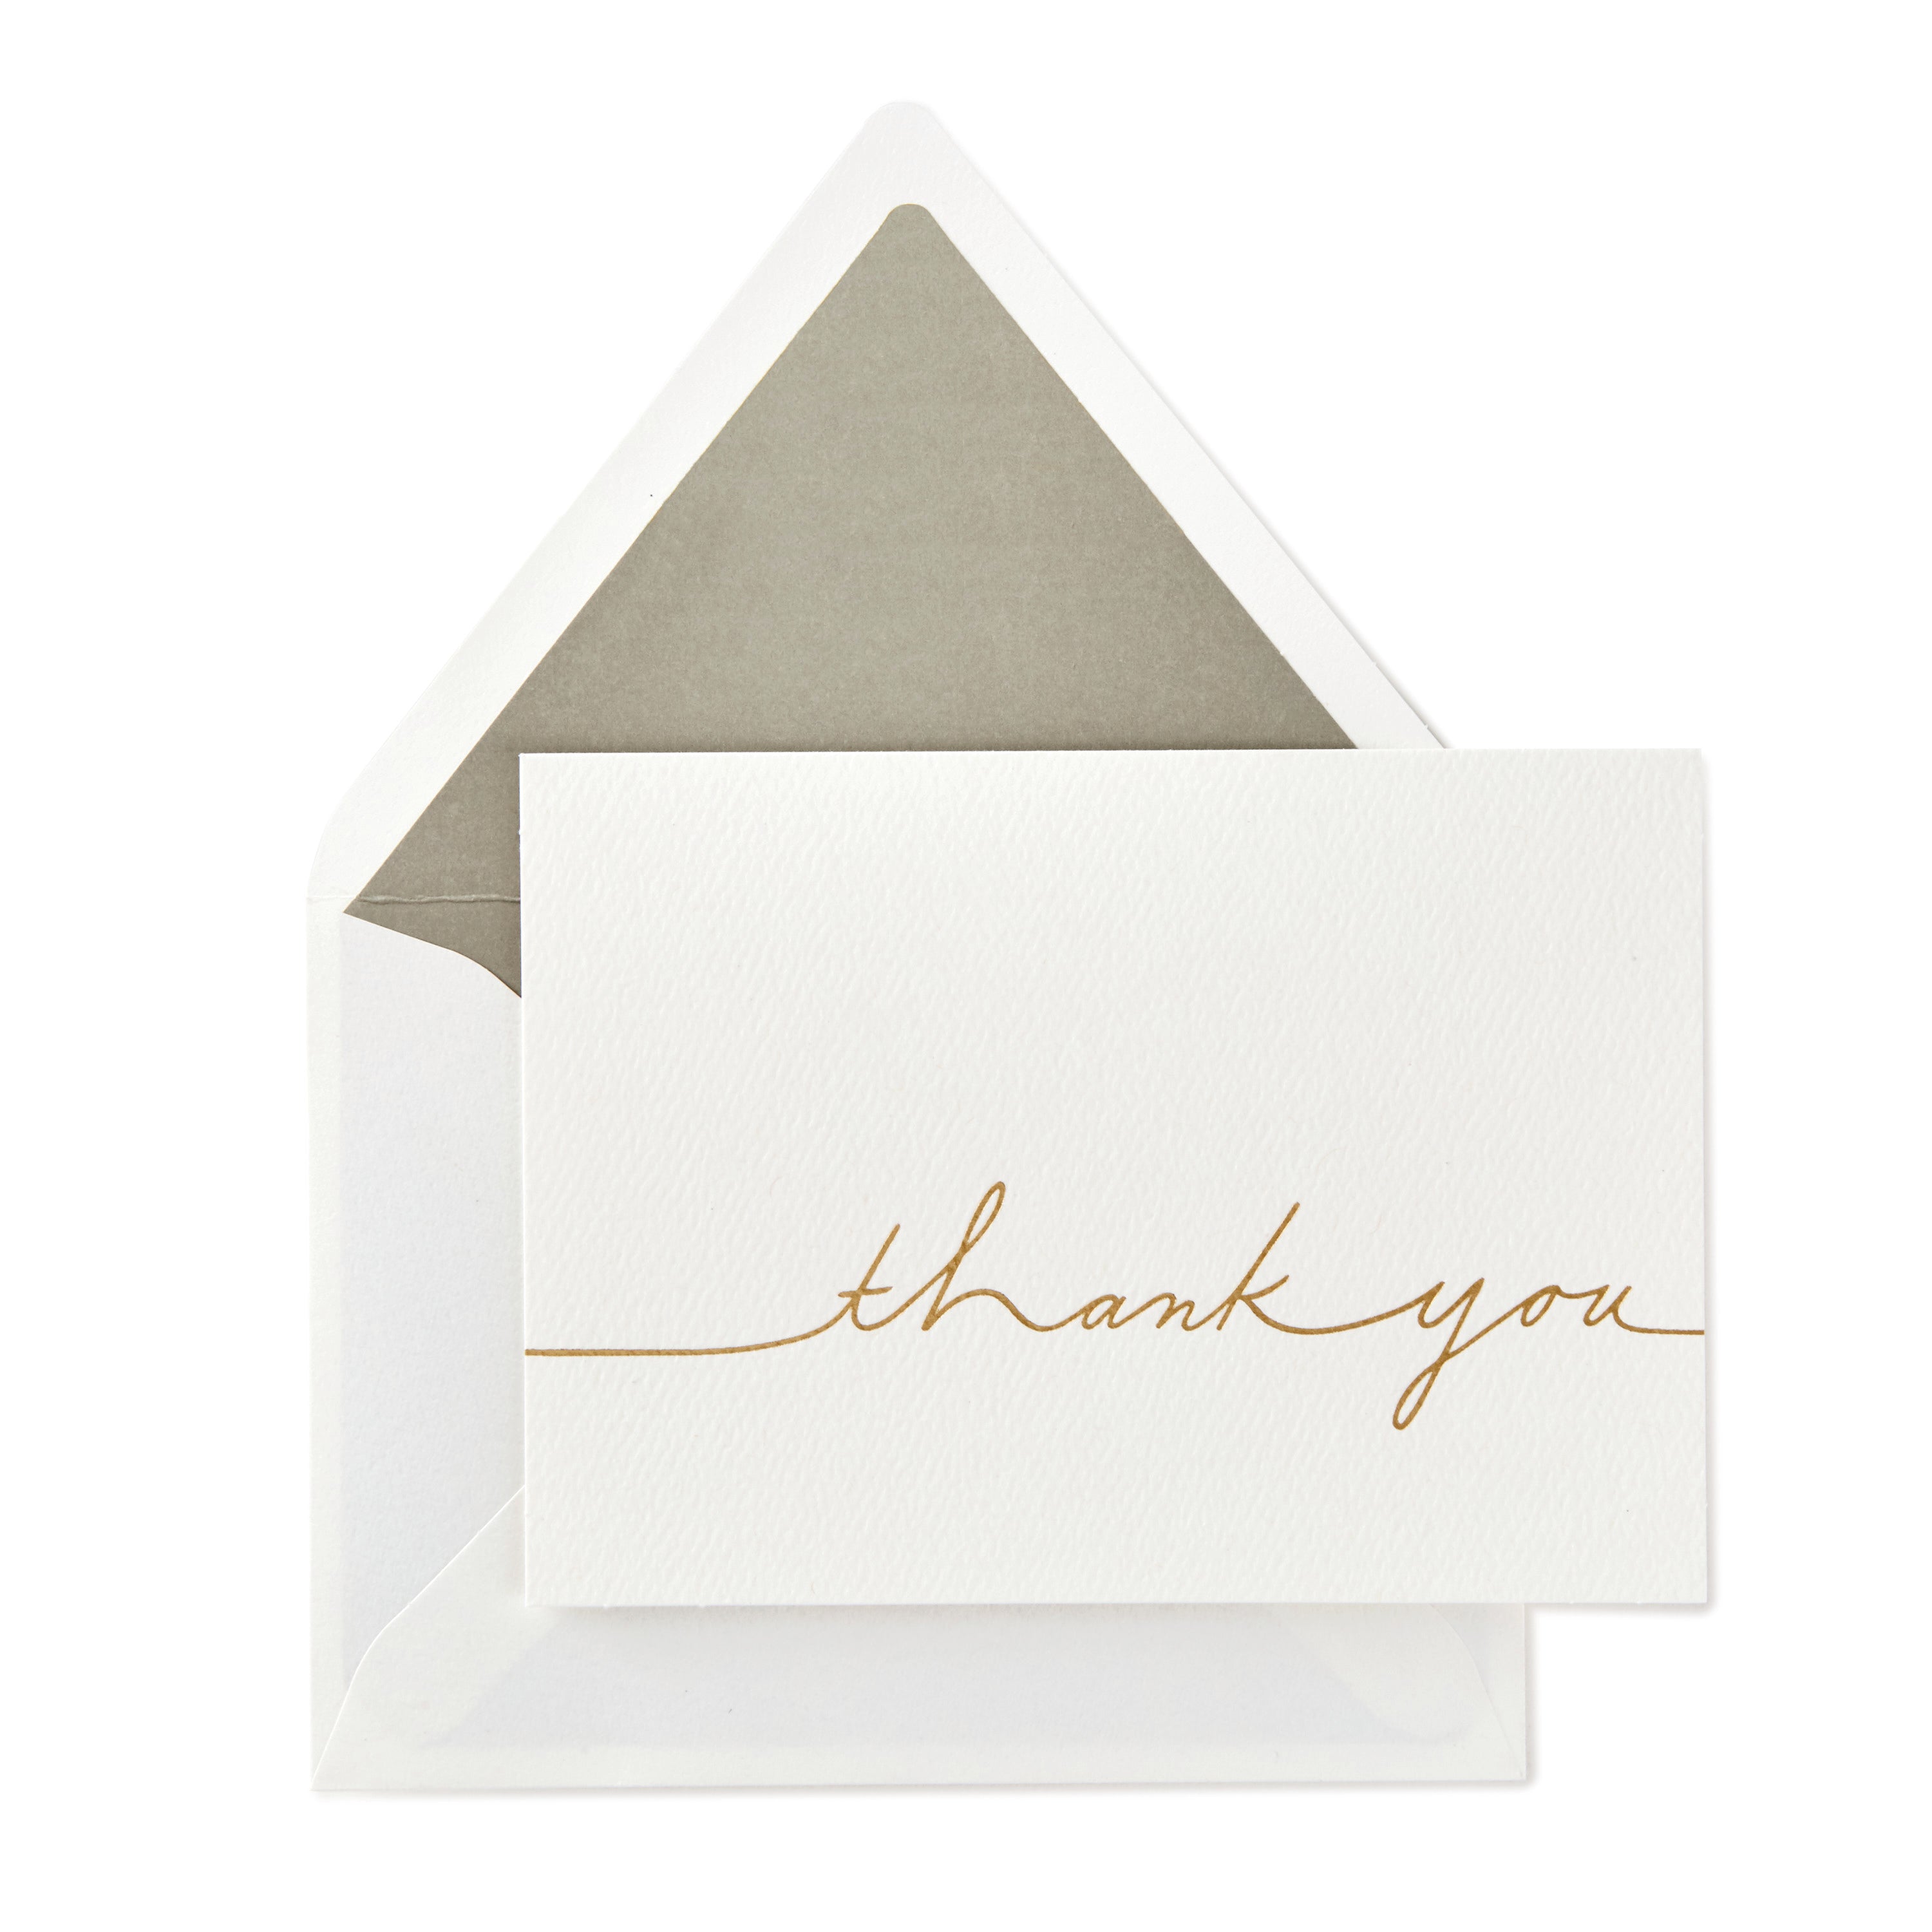 Thank You Cards 3036-73 - Aibani's